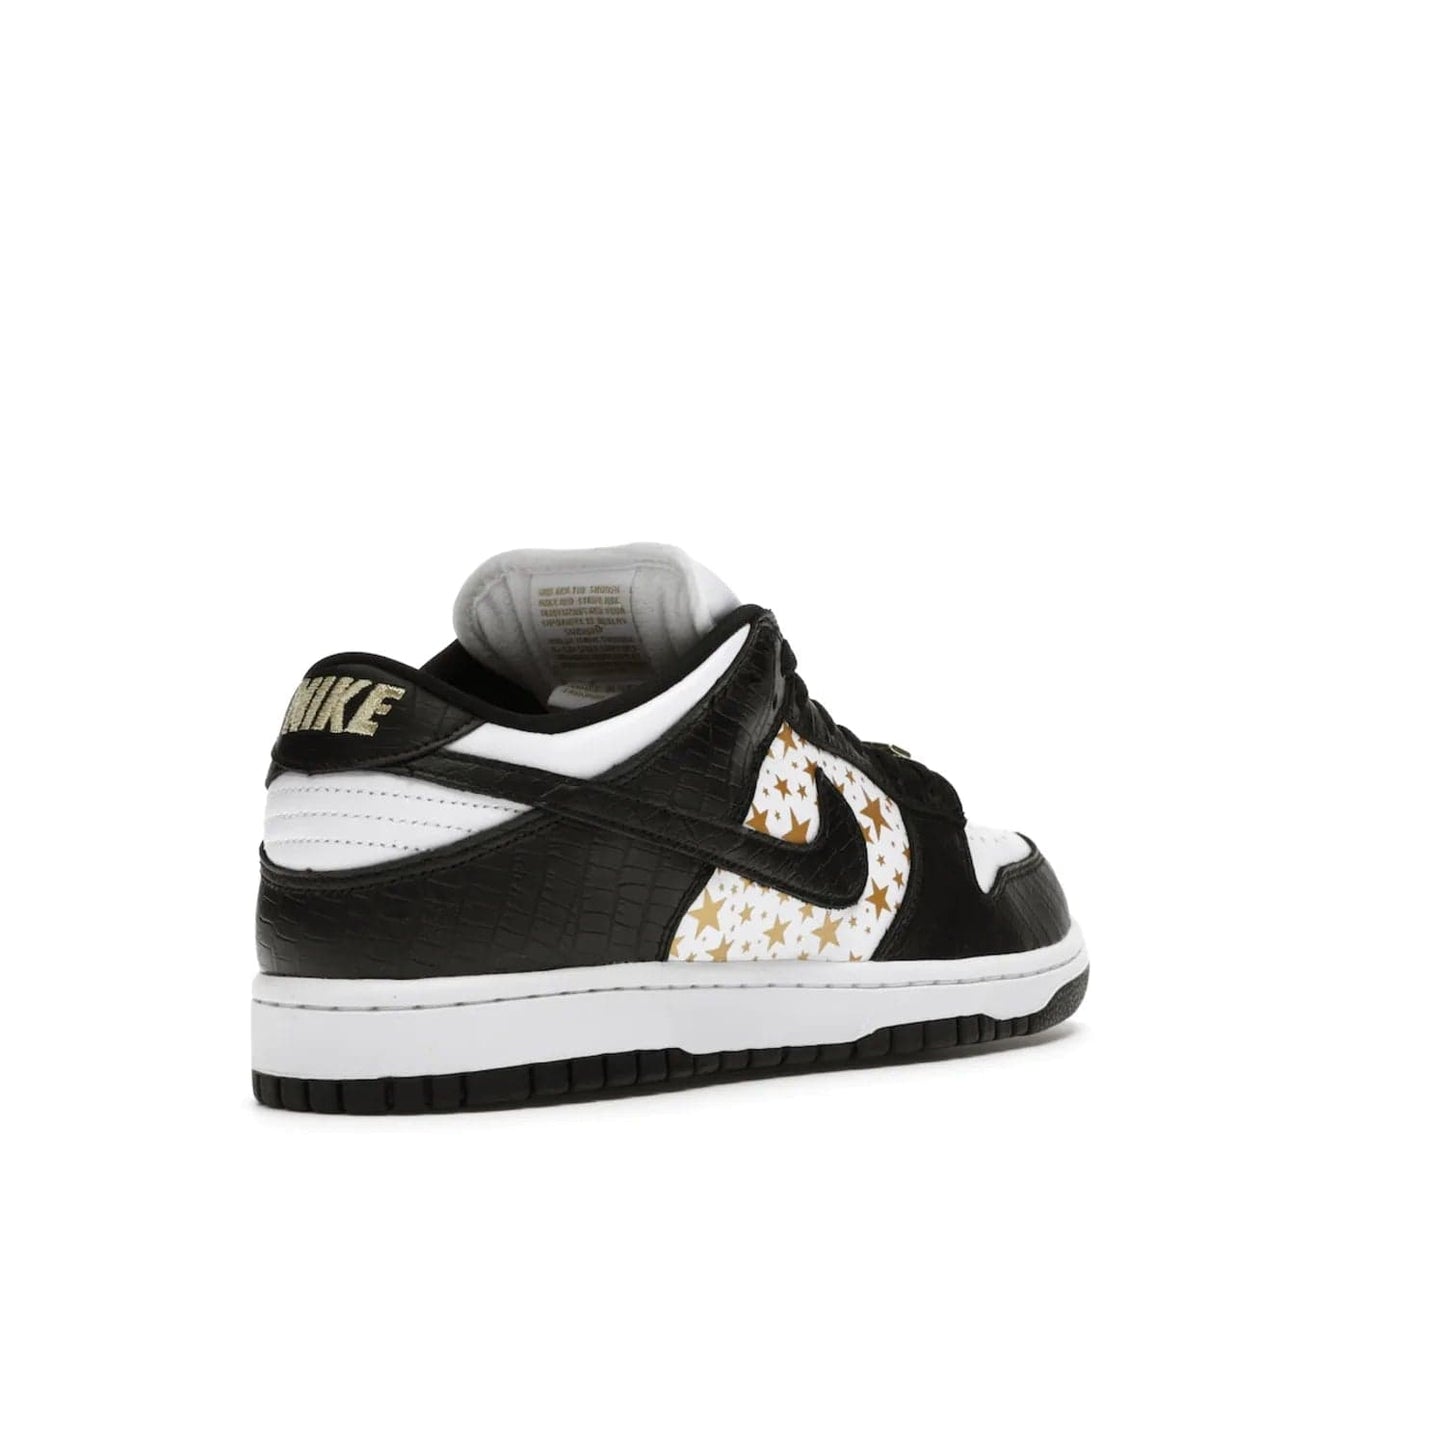 Nike SB Dunk Low Supreme Stars Black (2021) - Image 32 - Only at www.BallersClubKickz.com - Retro style and signature details make the Nike SB Dunk Low Supreme Black a must-have. This special edition shoe features a white leather upper and black croc skin overlays complemented by gold stars and deubré. Enjoy a piece of SB history and grab yours today.